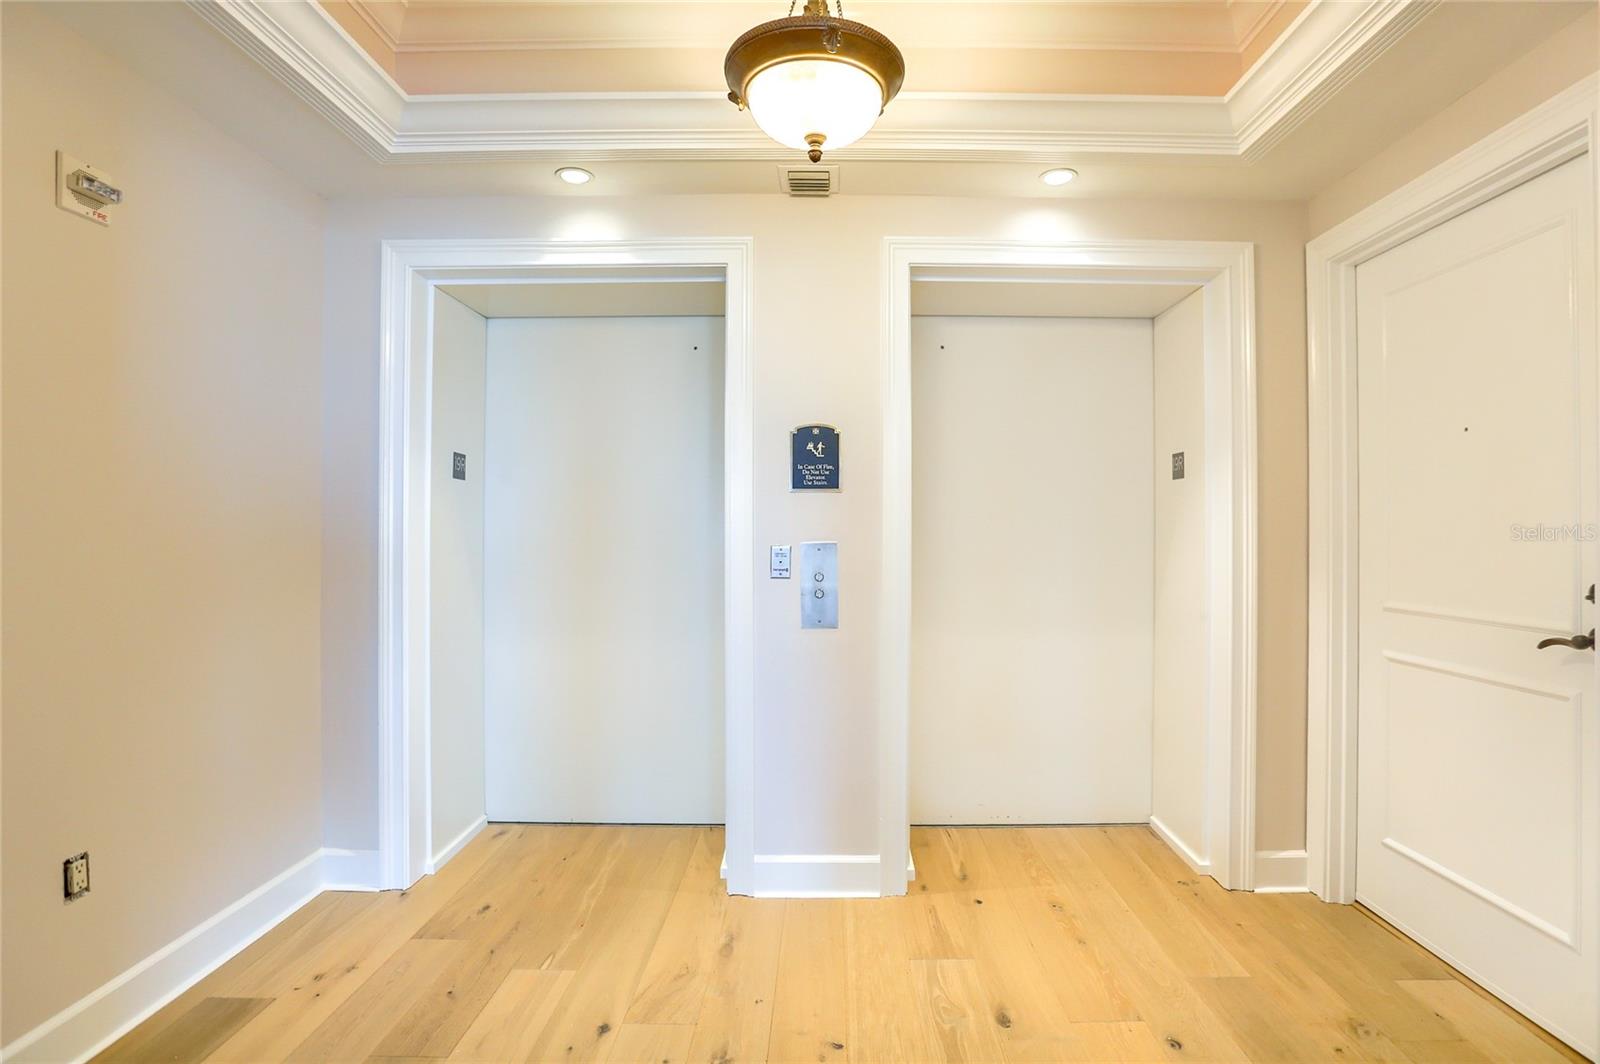 Entry way off of elevator